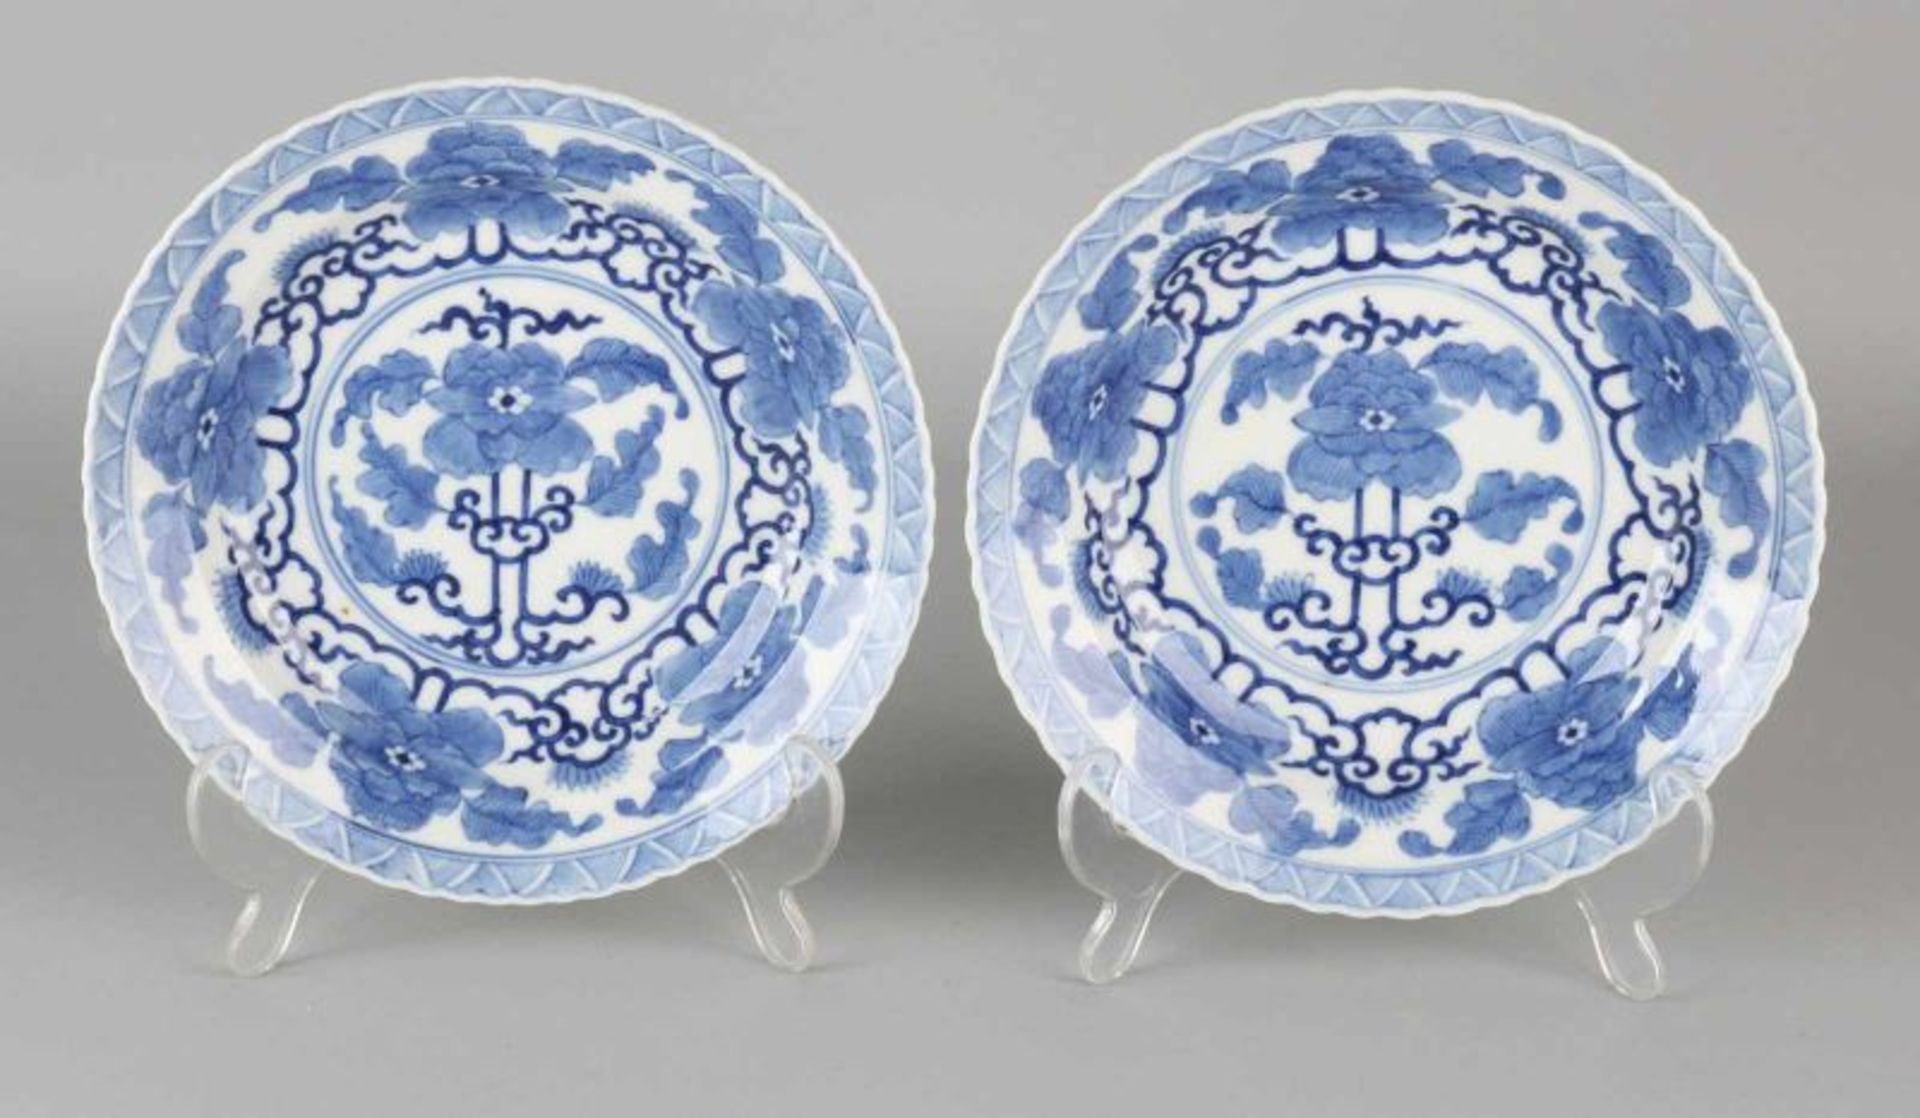 Two 18th - 19th century Chinese porcelain plates Kang Xi. Four characters. Floral decor. Size: ø